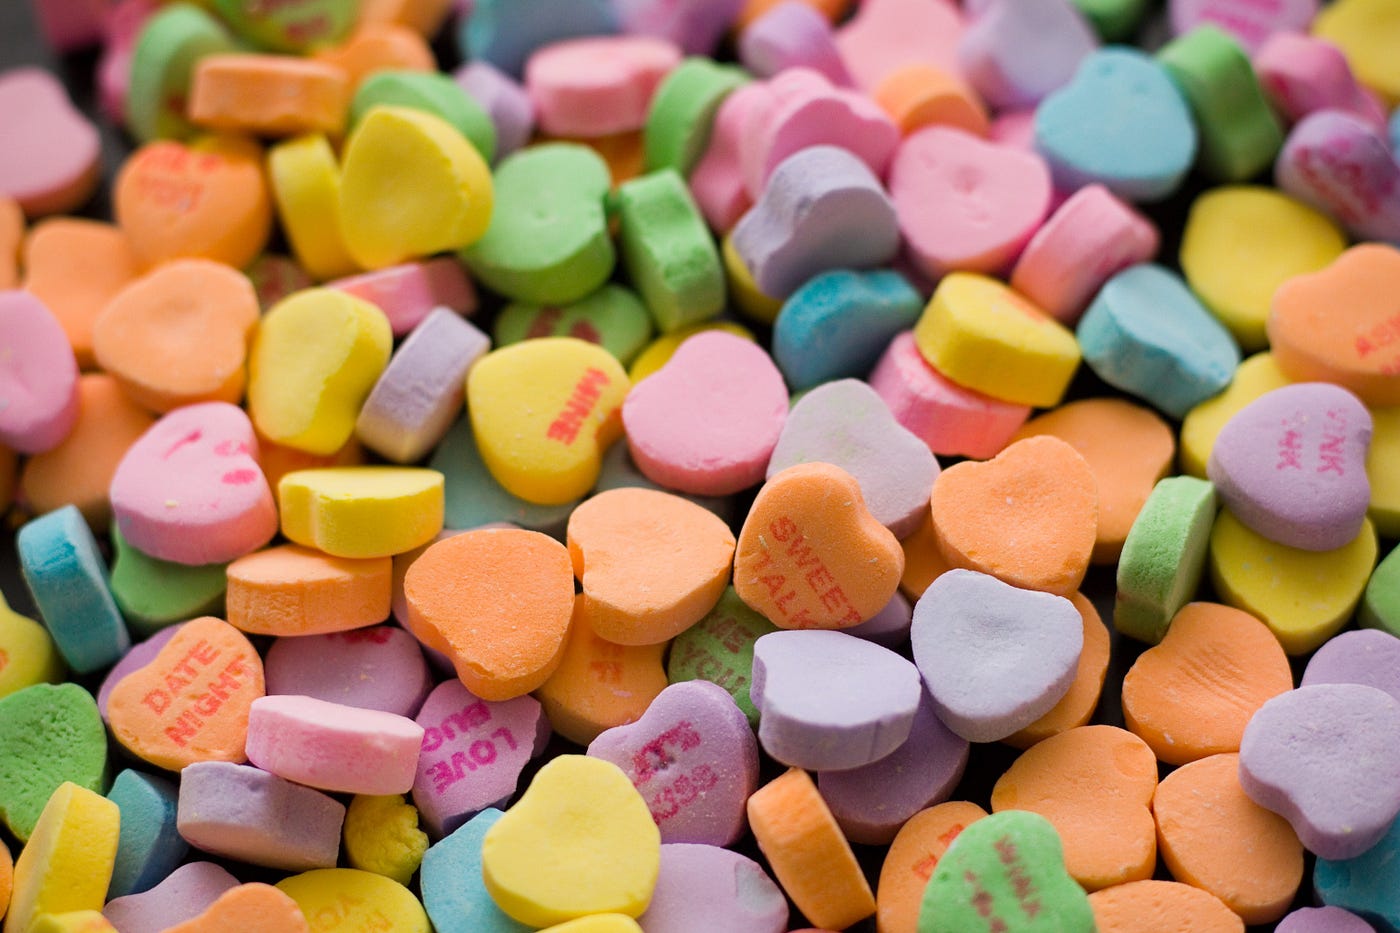 Sweethearts Candies have new sayings this year inspired by lyrics from  classic love songs